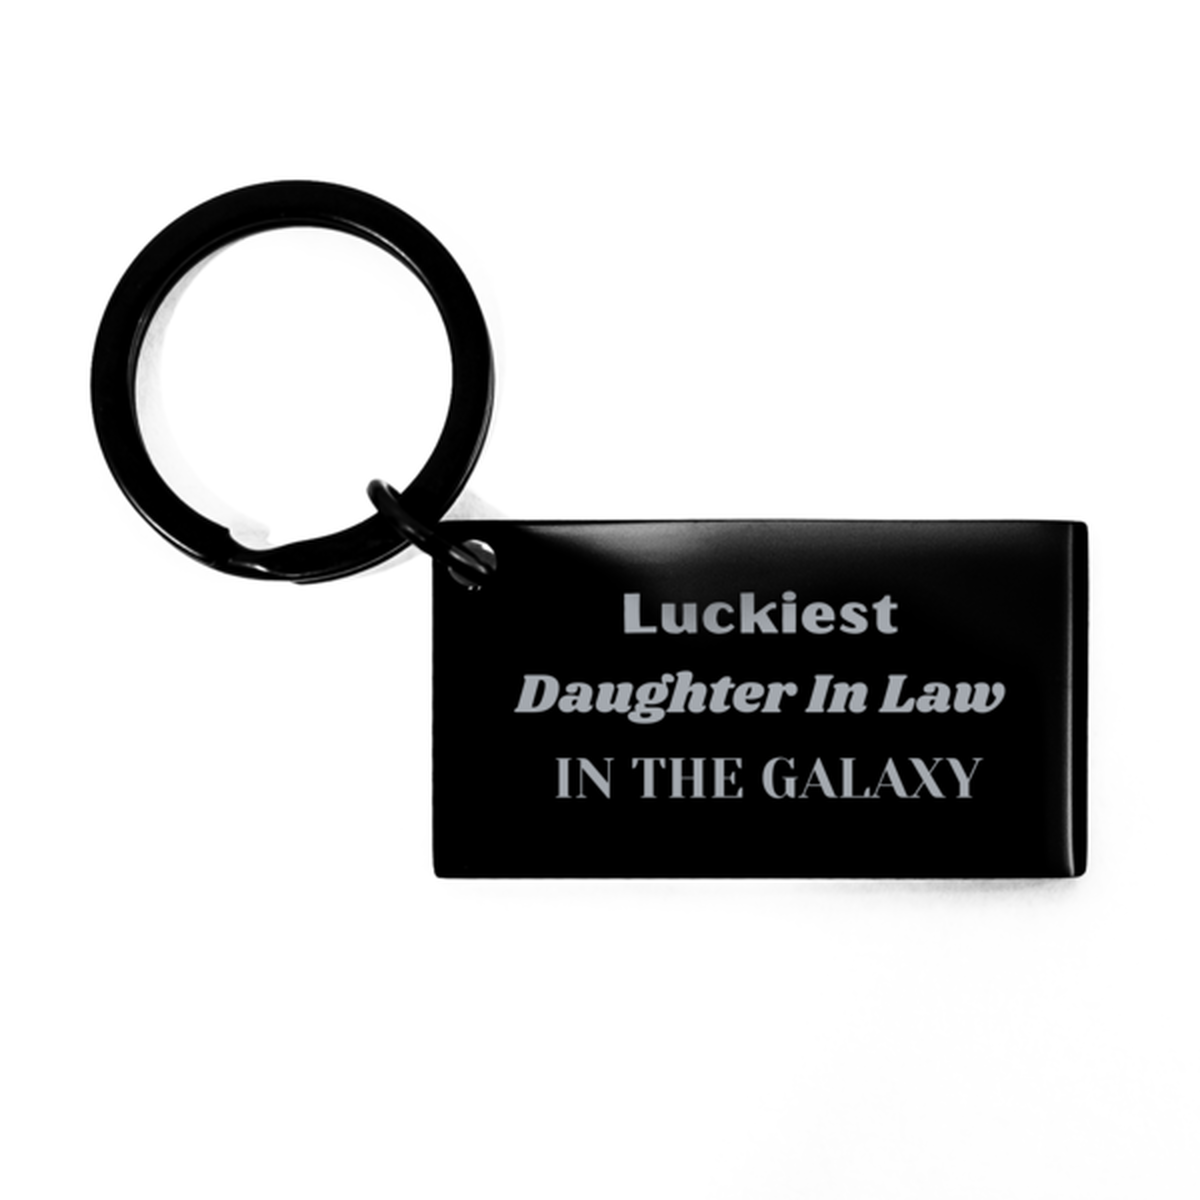 Luckiest Daughter In Law in the Galaxy, To My Daughter In Law Engraved Gifts, Christmas Daughter In Law Keychain Gifts, X-mas Birthday Unique Gifts For Daughter In Law Men Women